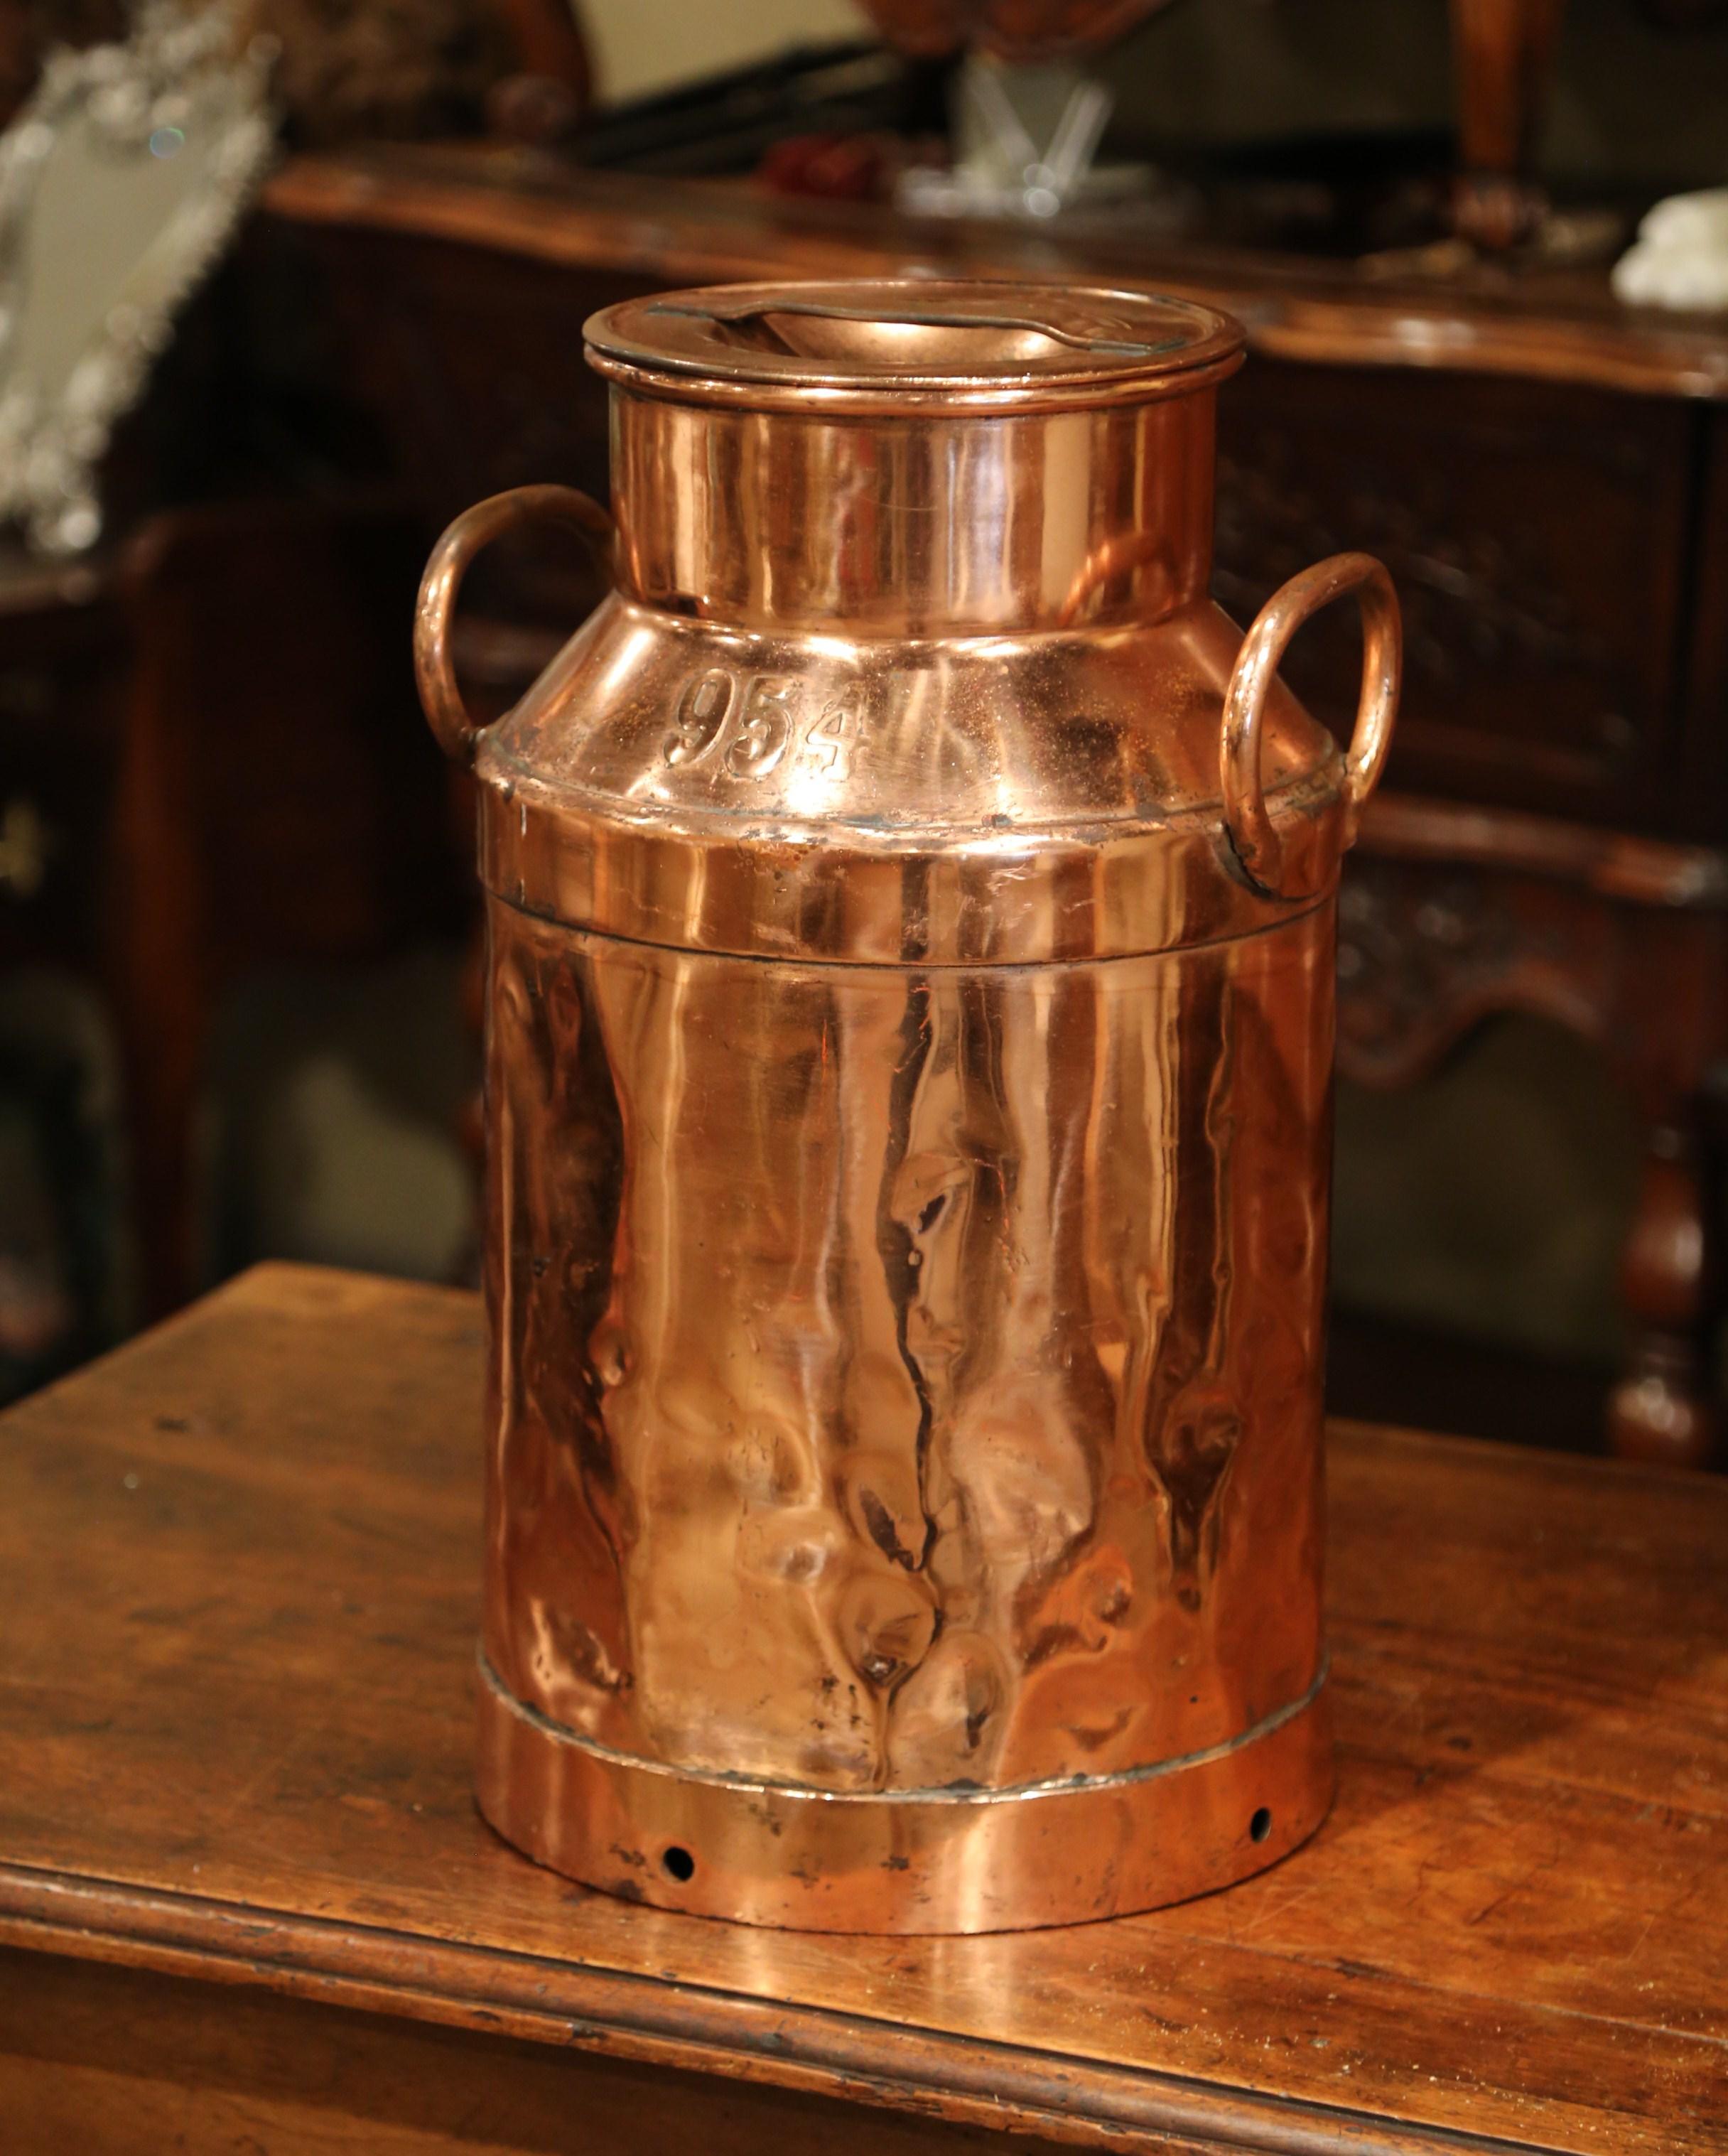 Use this beautiful antique milk can as an umbrella stand by your front door. Crafted in France circa 1880, the tall metal and copper container has side handles and its original removable lid. The traditional, utilitarian urn is branded with the